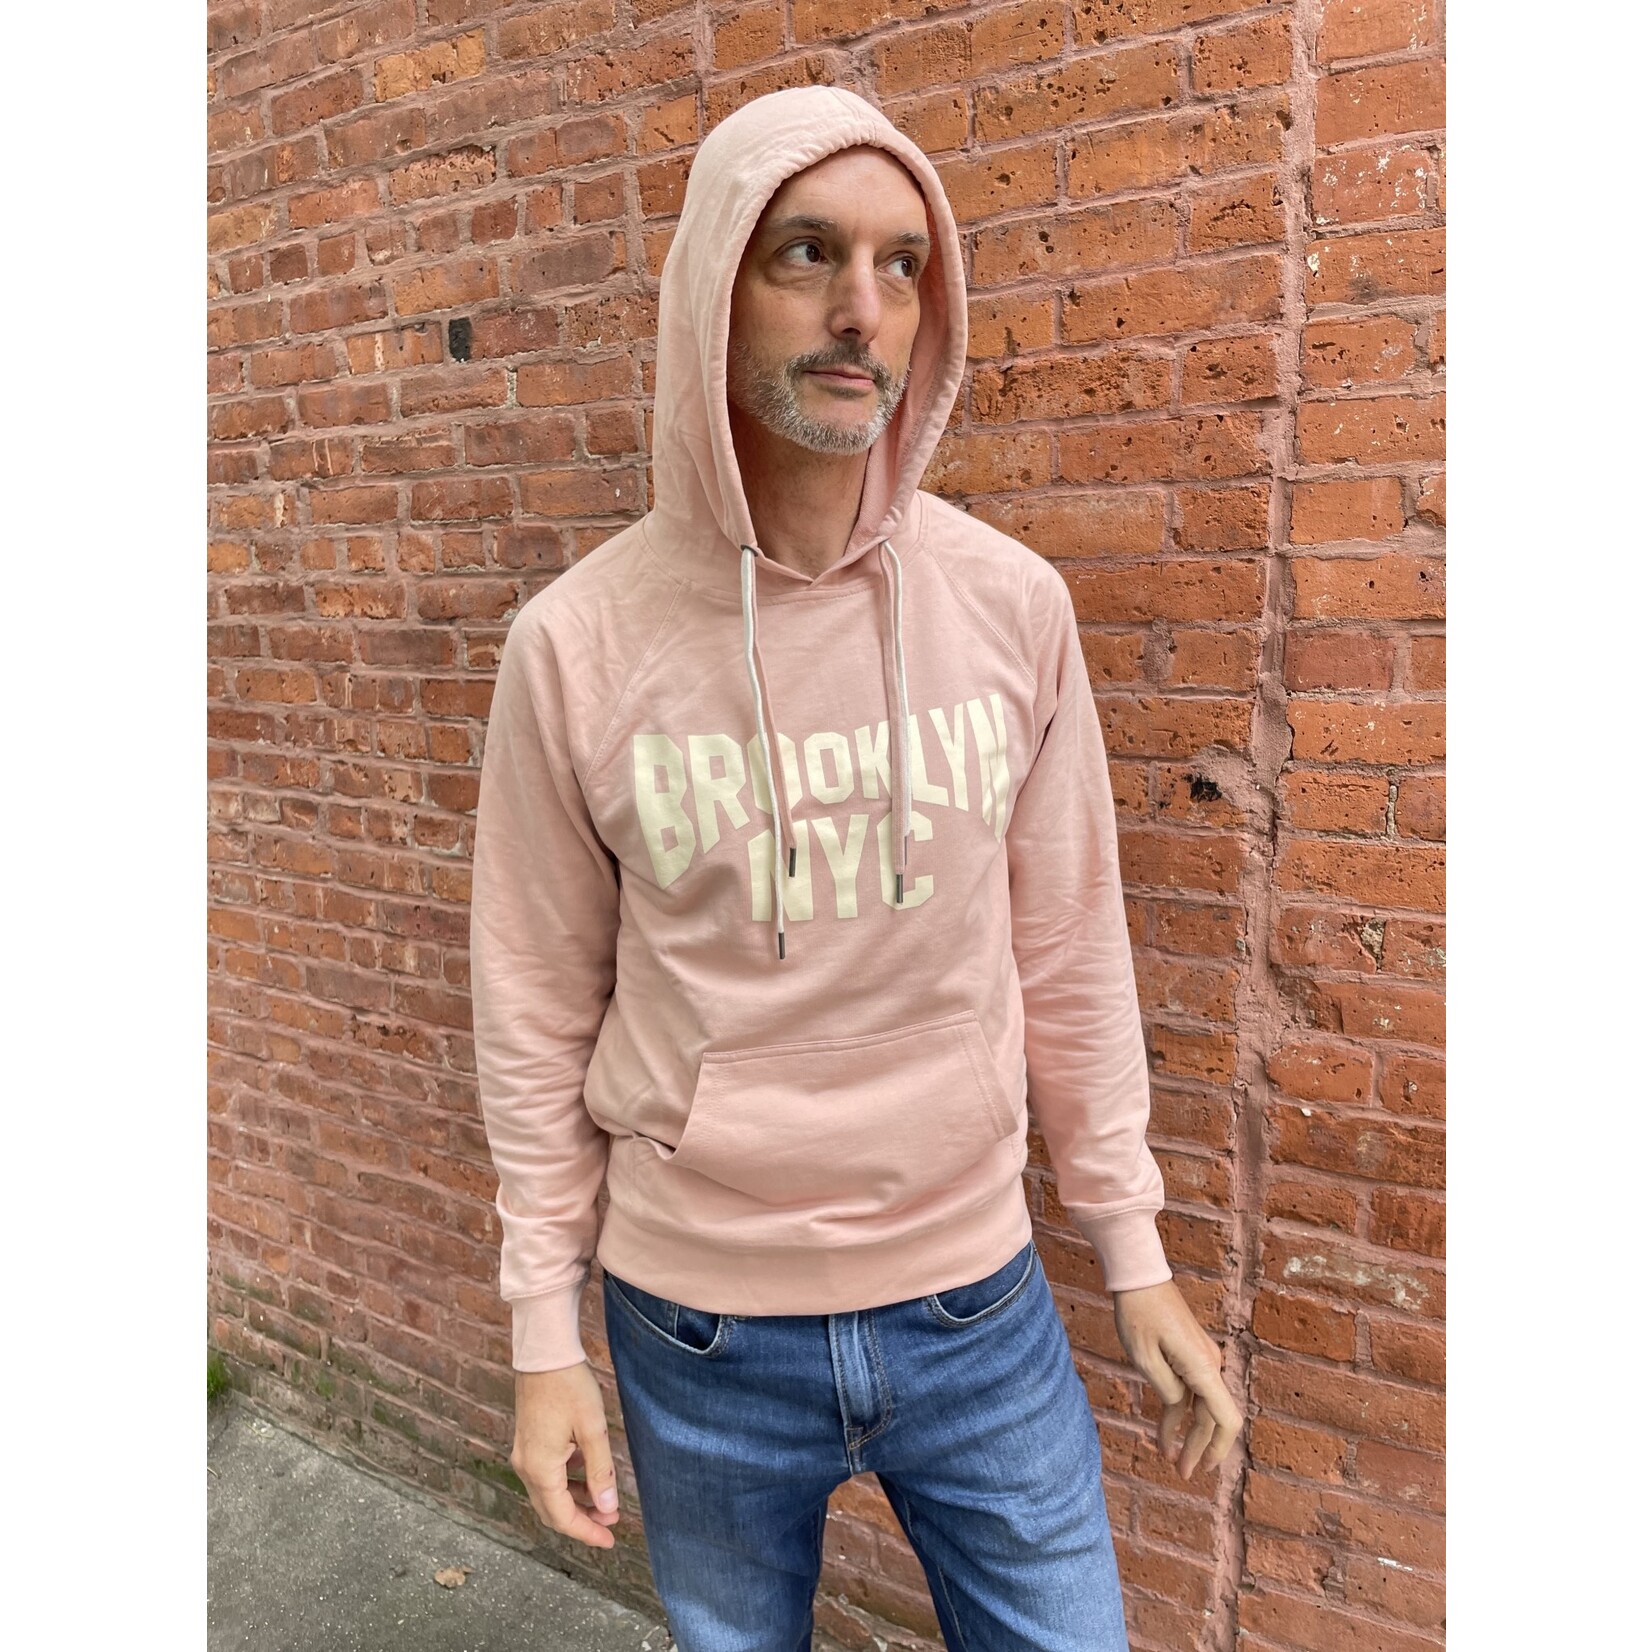 Exit9 Gift Emporium Classic Brooklyn Midweight Hoodie in Rose